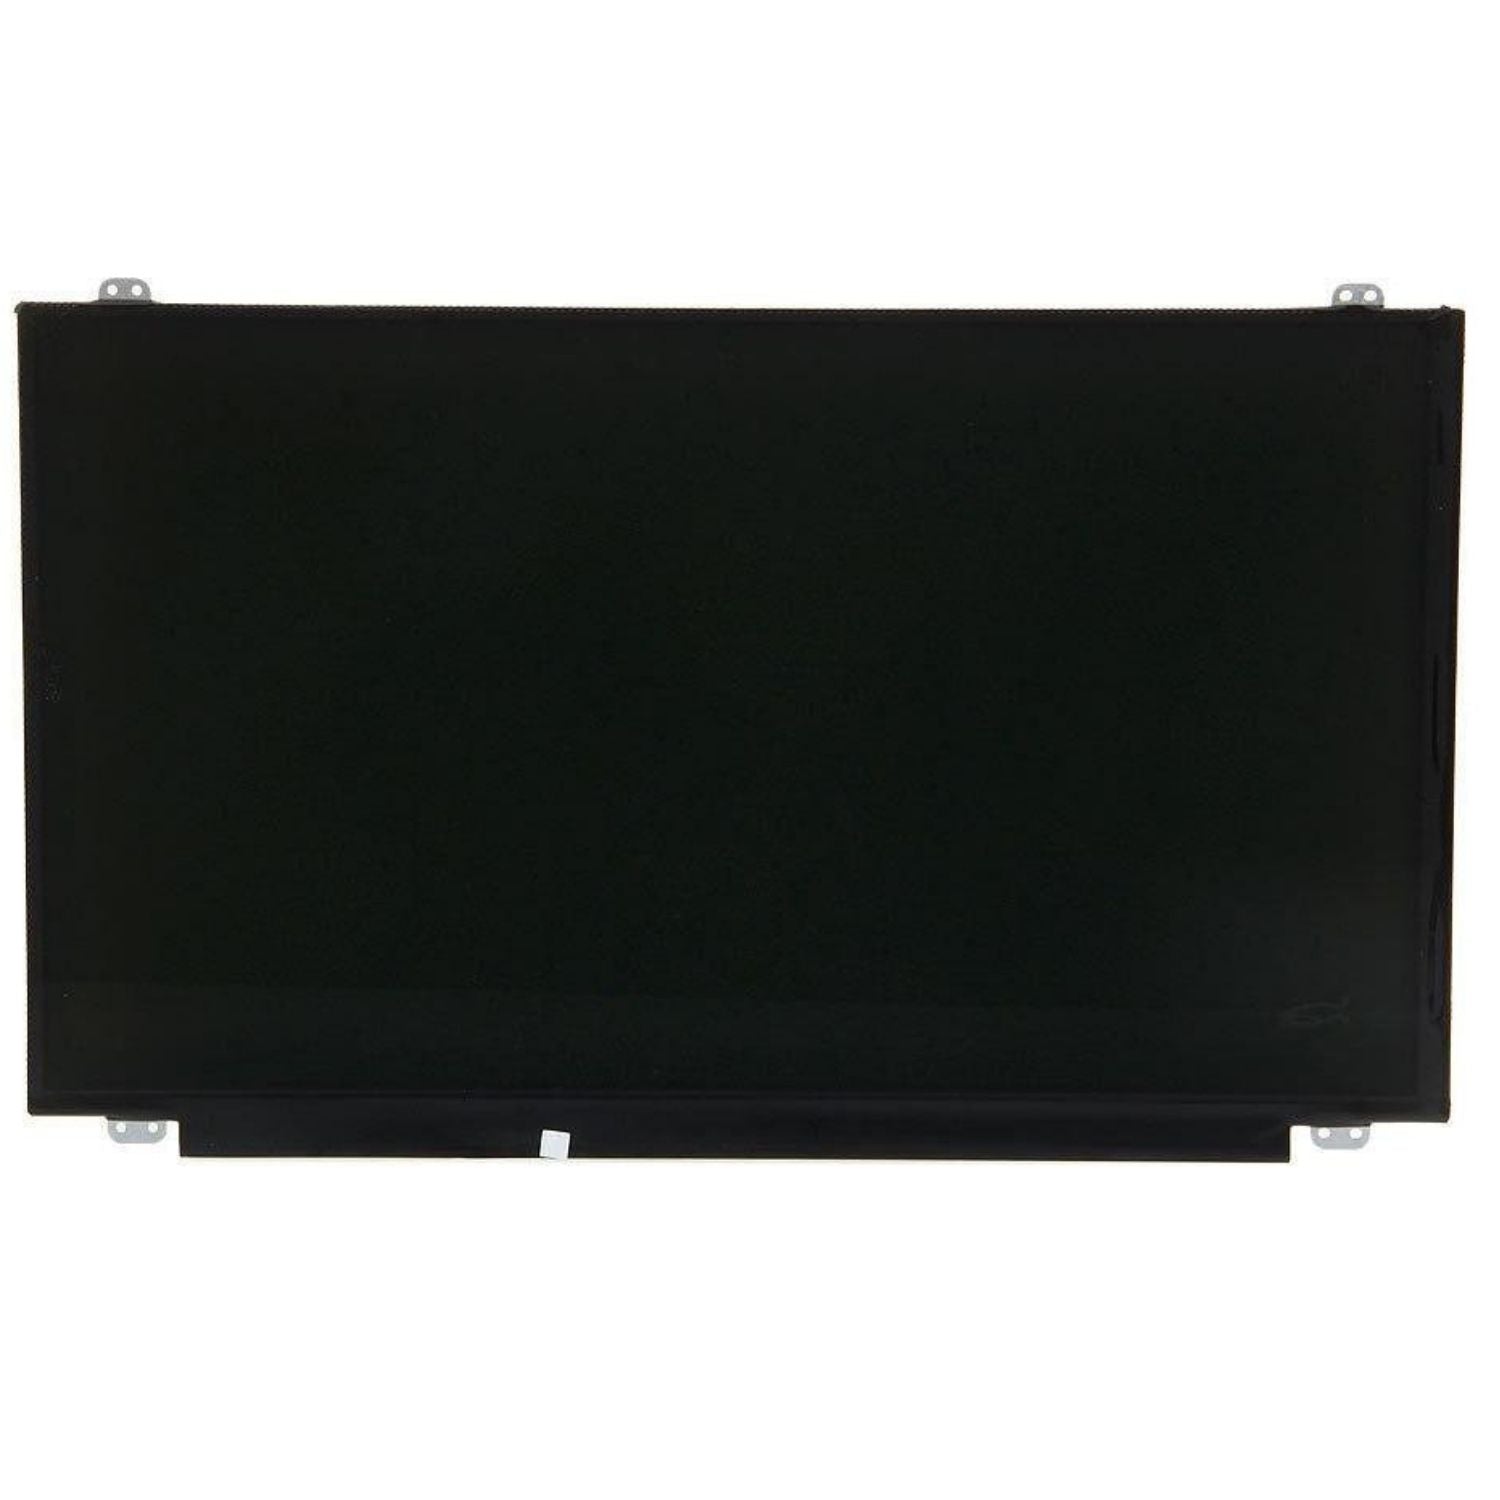 15.6 40 pin Full HD (FHD) slim paper screen for Hp Dell Lenovo Acer Sony Asus Series Laptops.